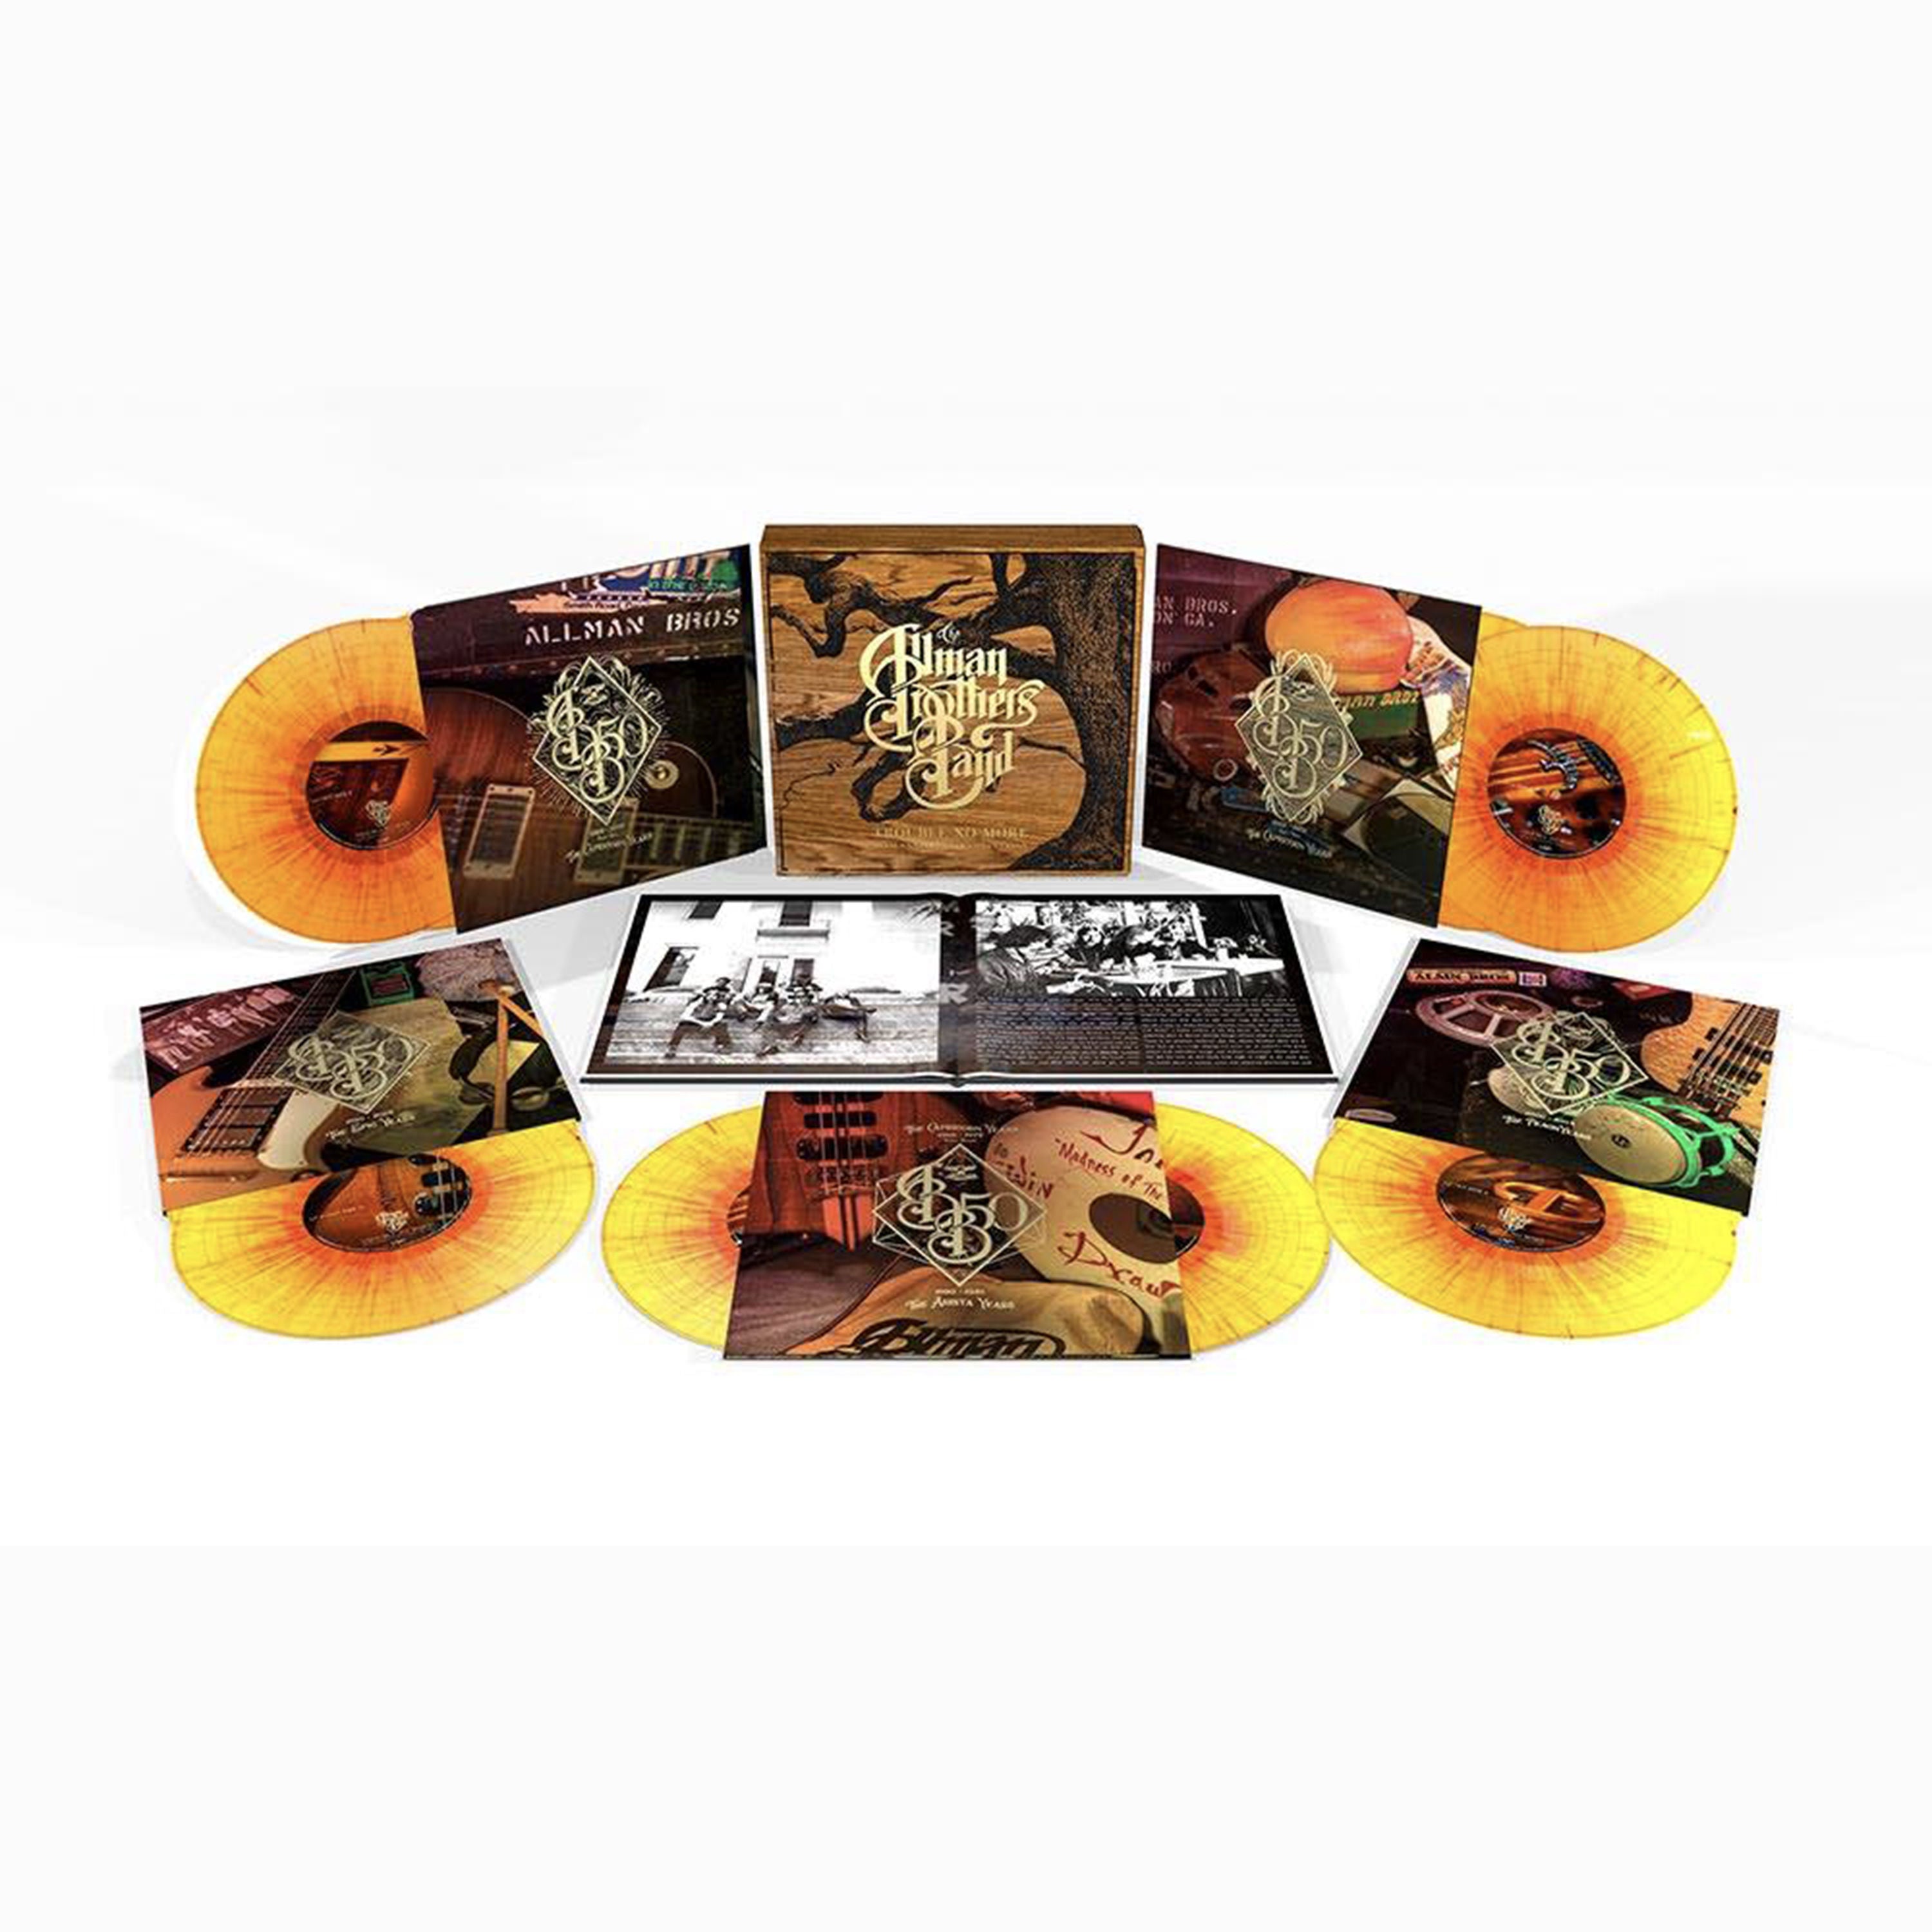 The Allman Brothers Band - Trouble No More (50th Anniversary Collection): Exclusive Orange + Red Splatter Vinyl 10LP Box Set